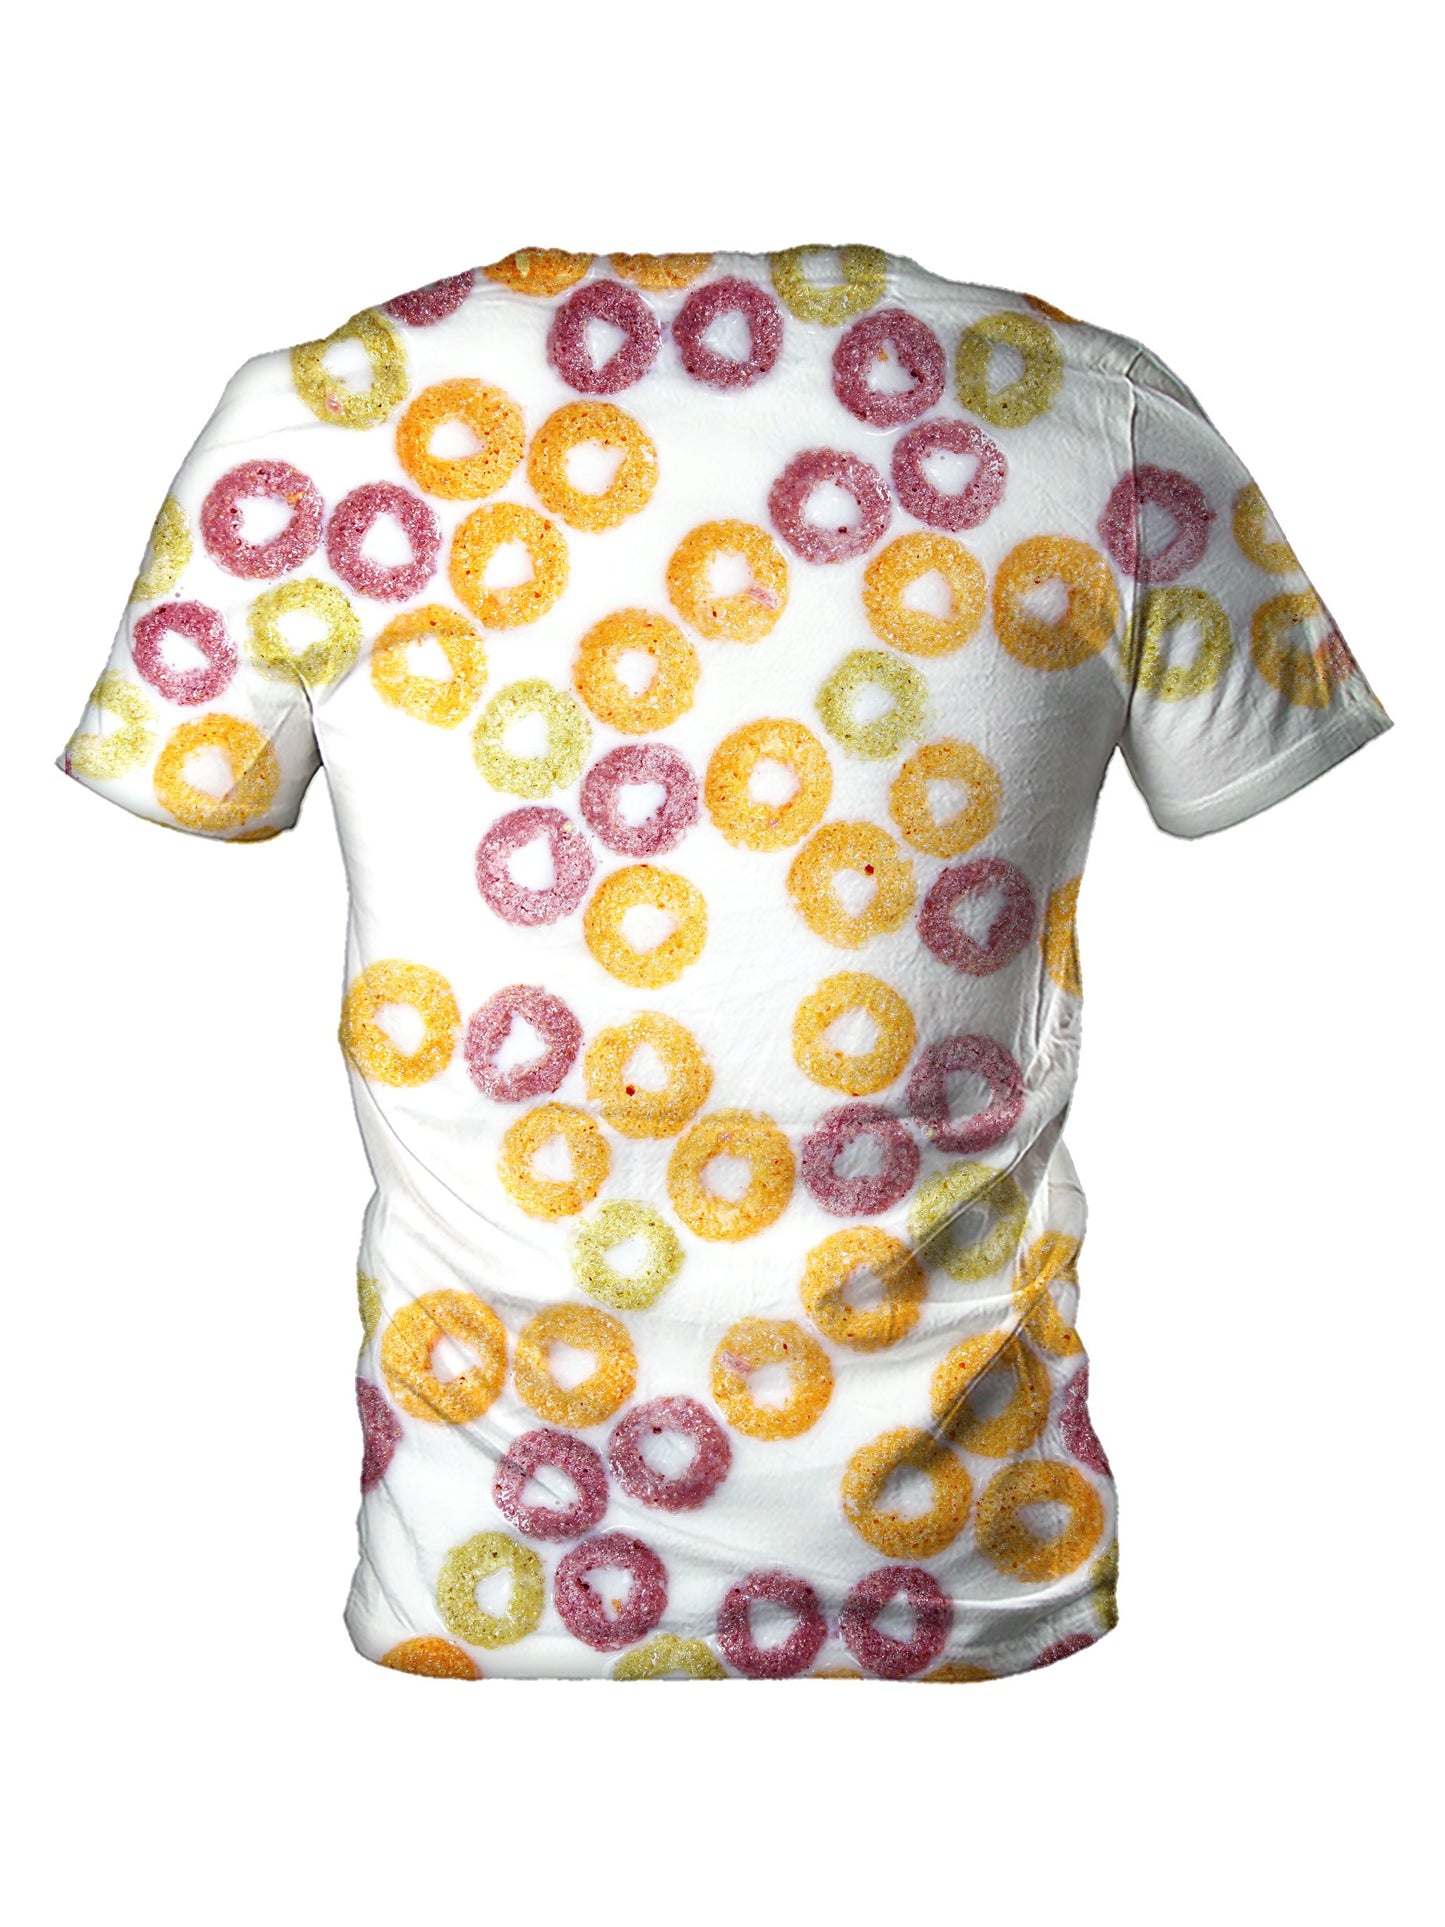 Back view of all over print psychedelic foodie t shirt by Gratefully Dyed Apparel. 